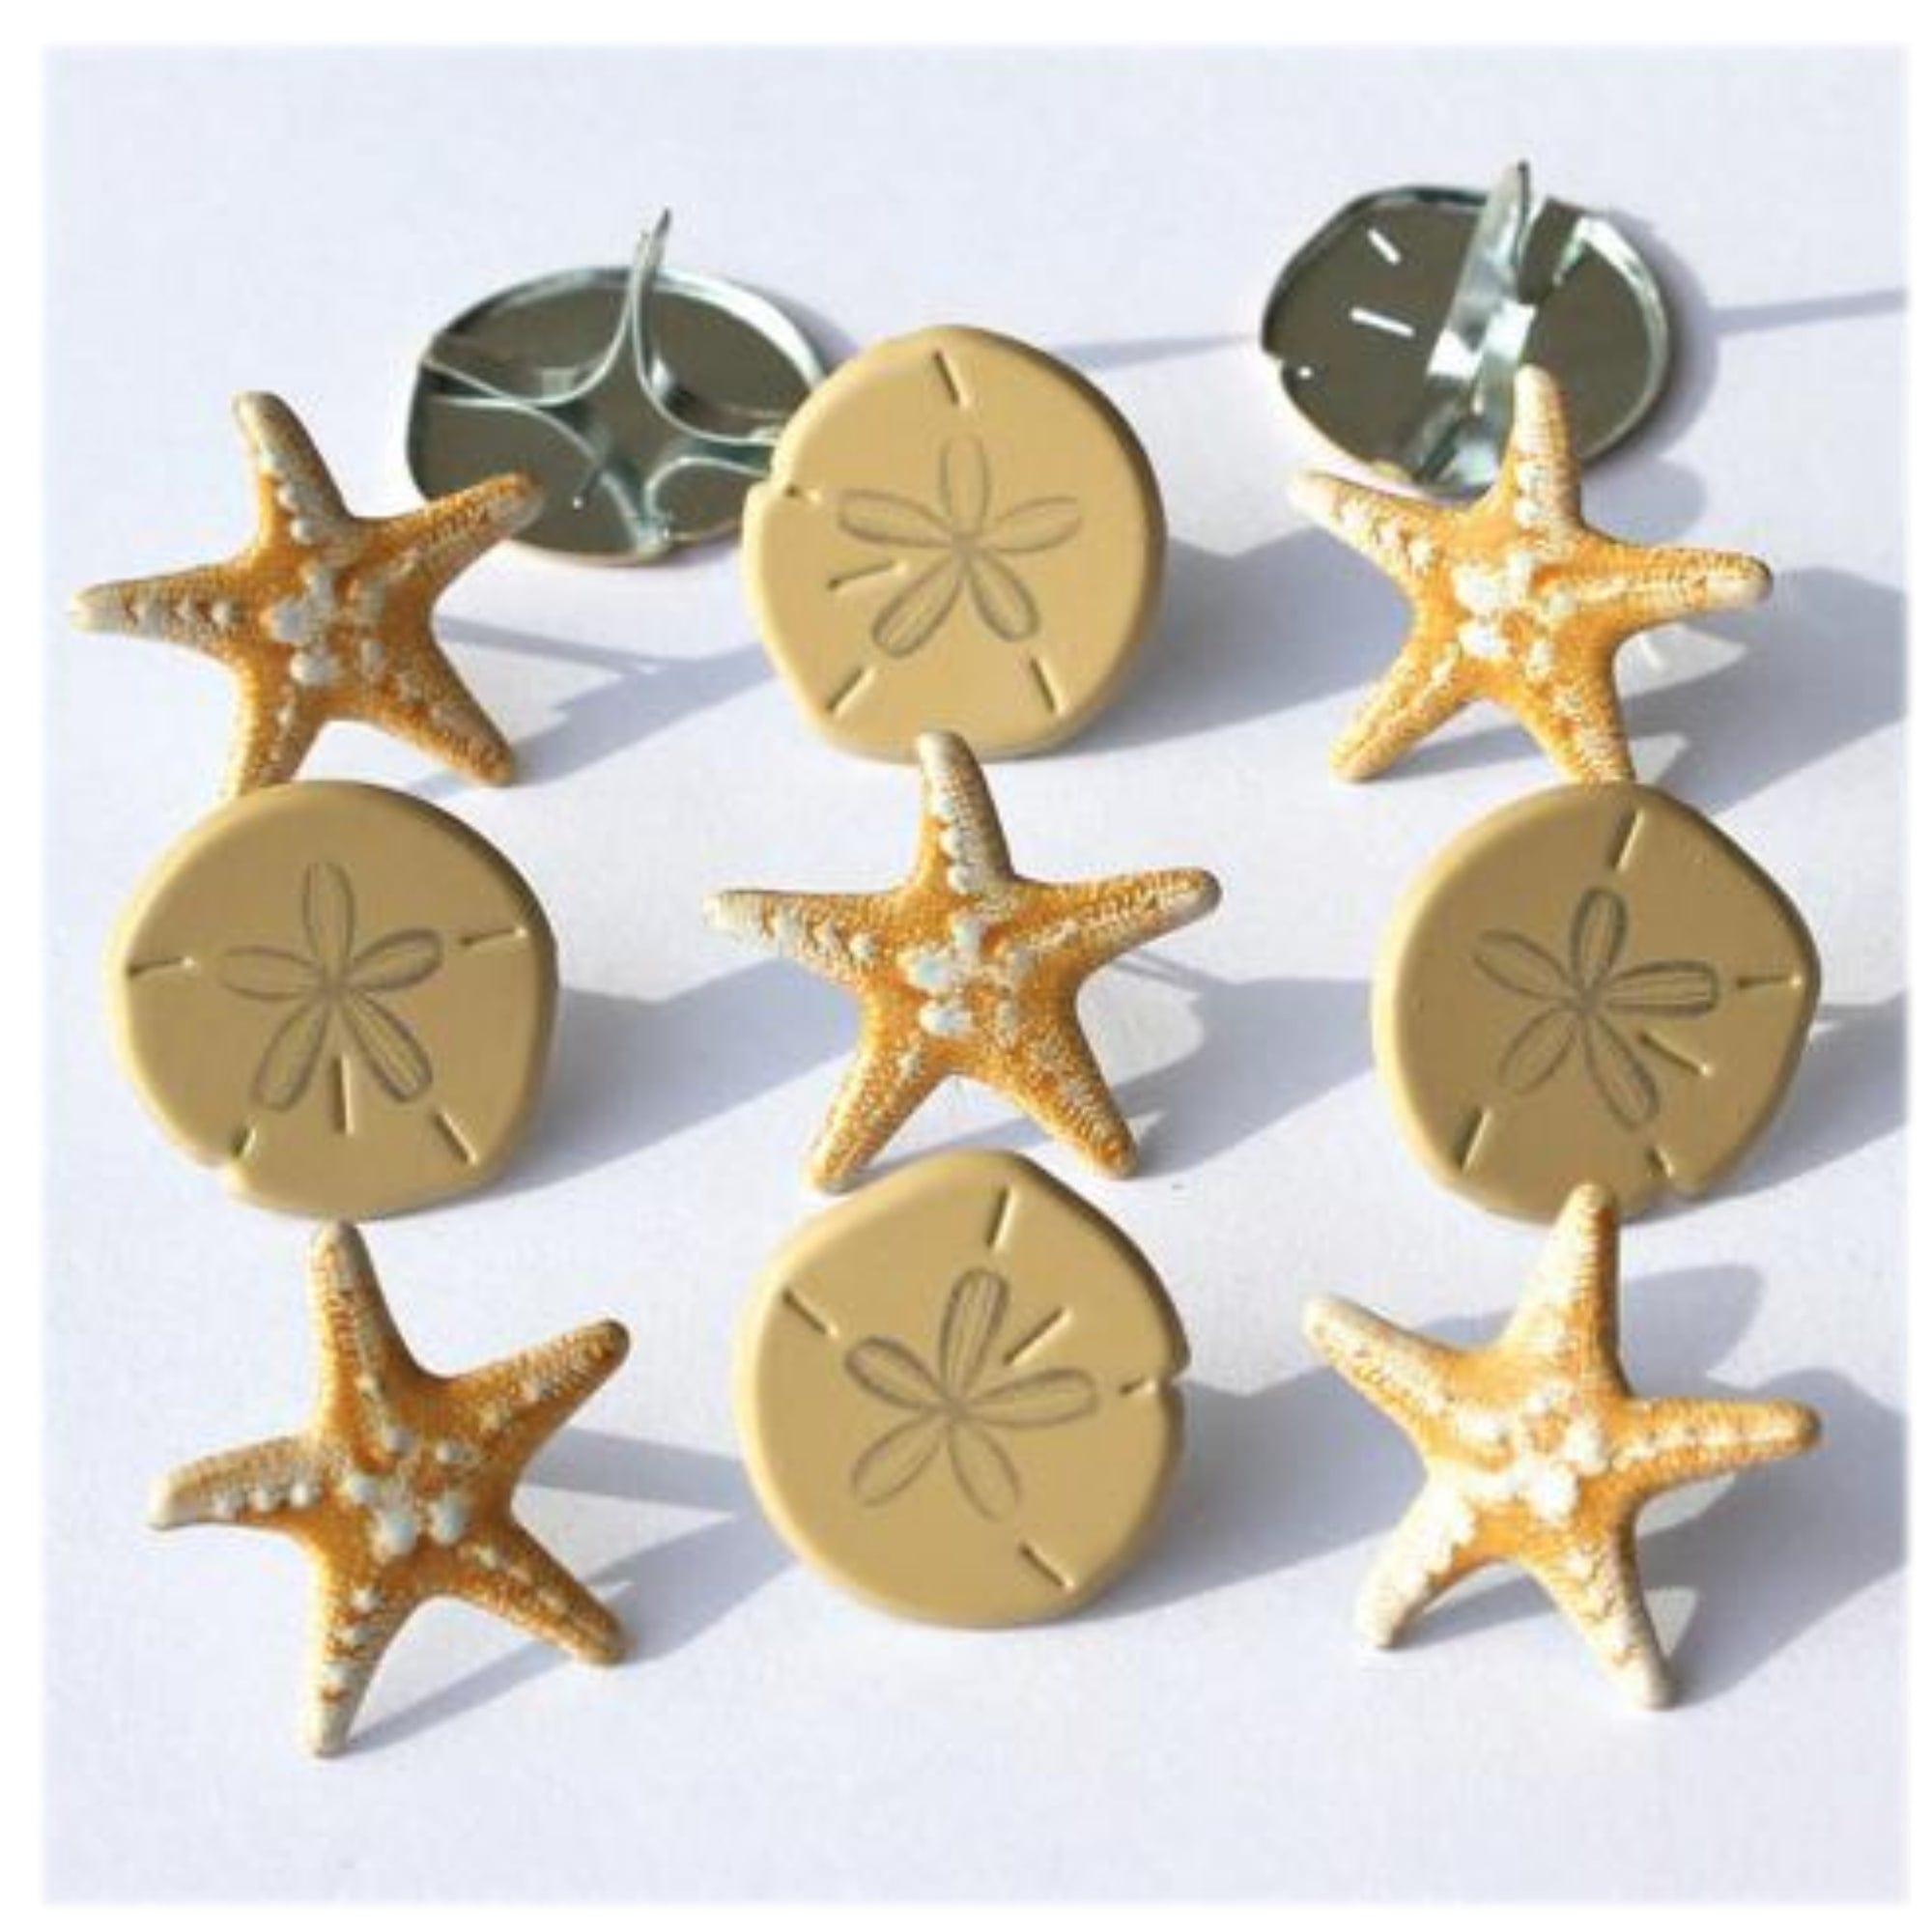 Seashore Shells & Starfish Brads by Eyelet Outlet - Pkg. of 12